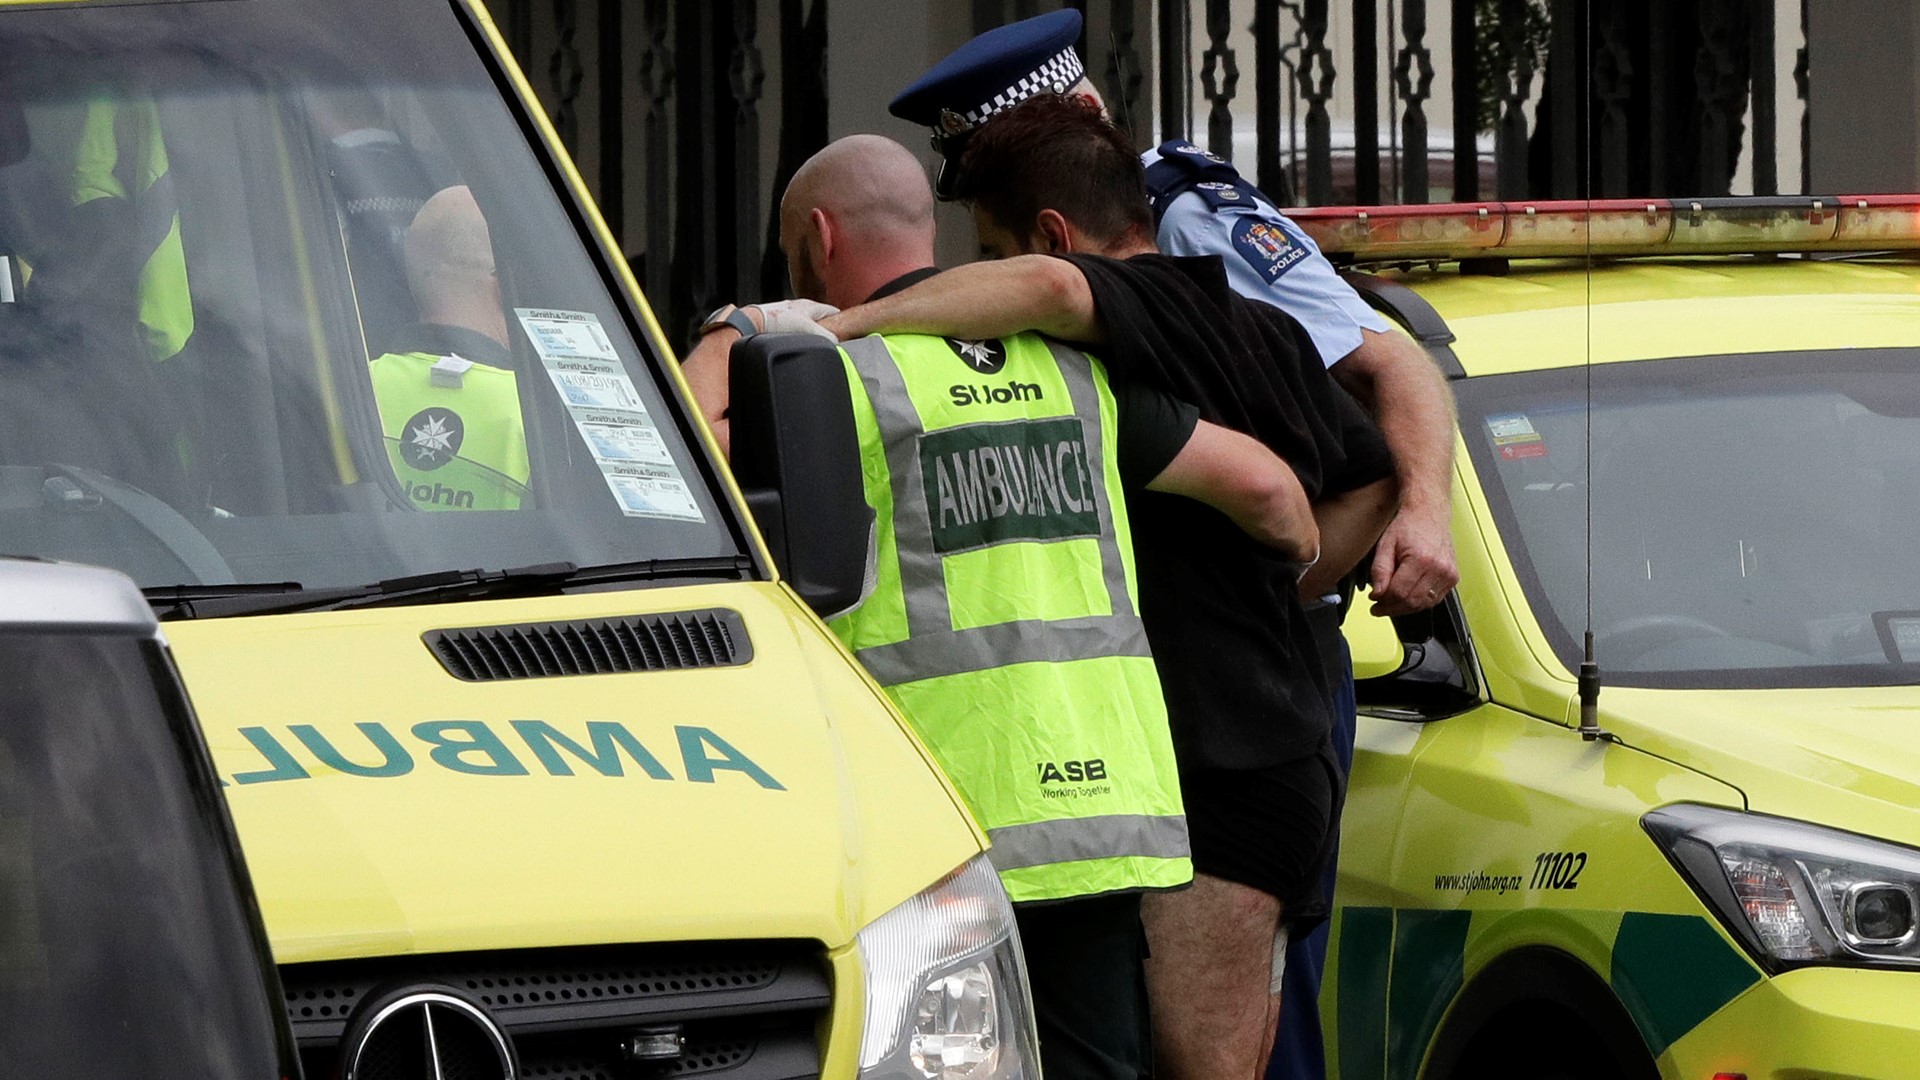 A shooter entered a Mosque in Christchurch, New Zealand. The number of injured/ deceased individuals is not known at this time.